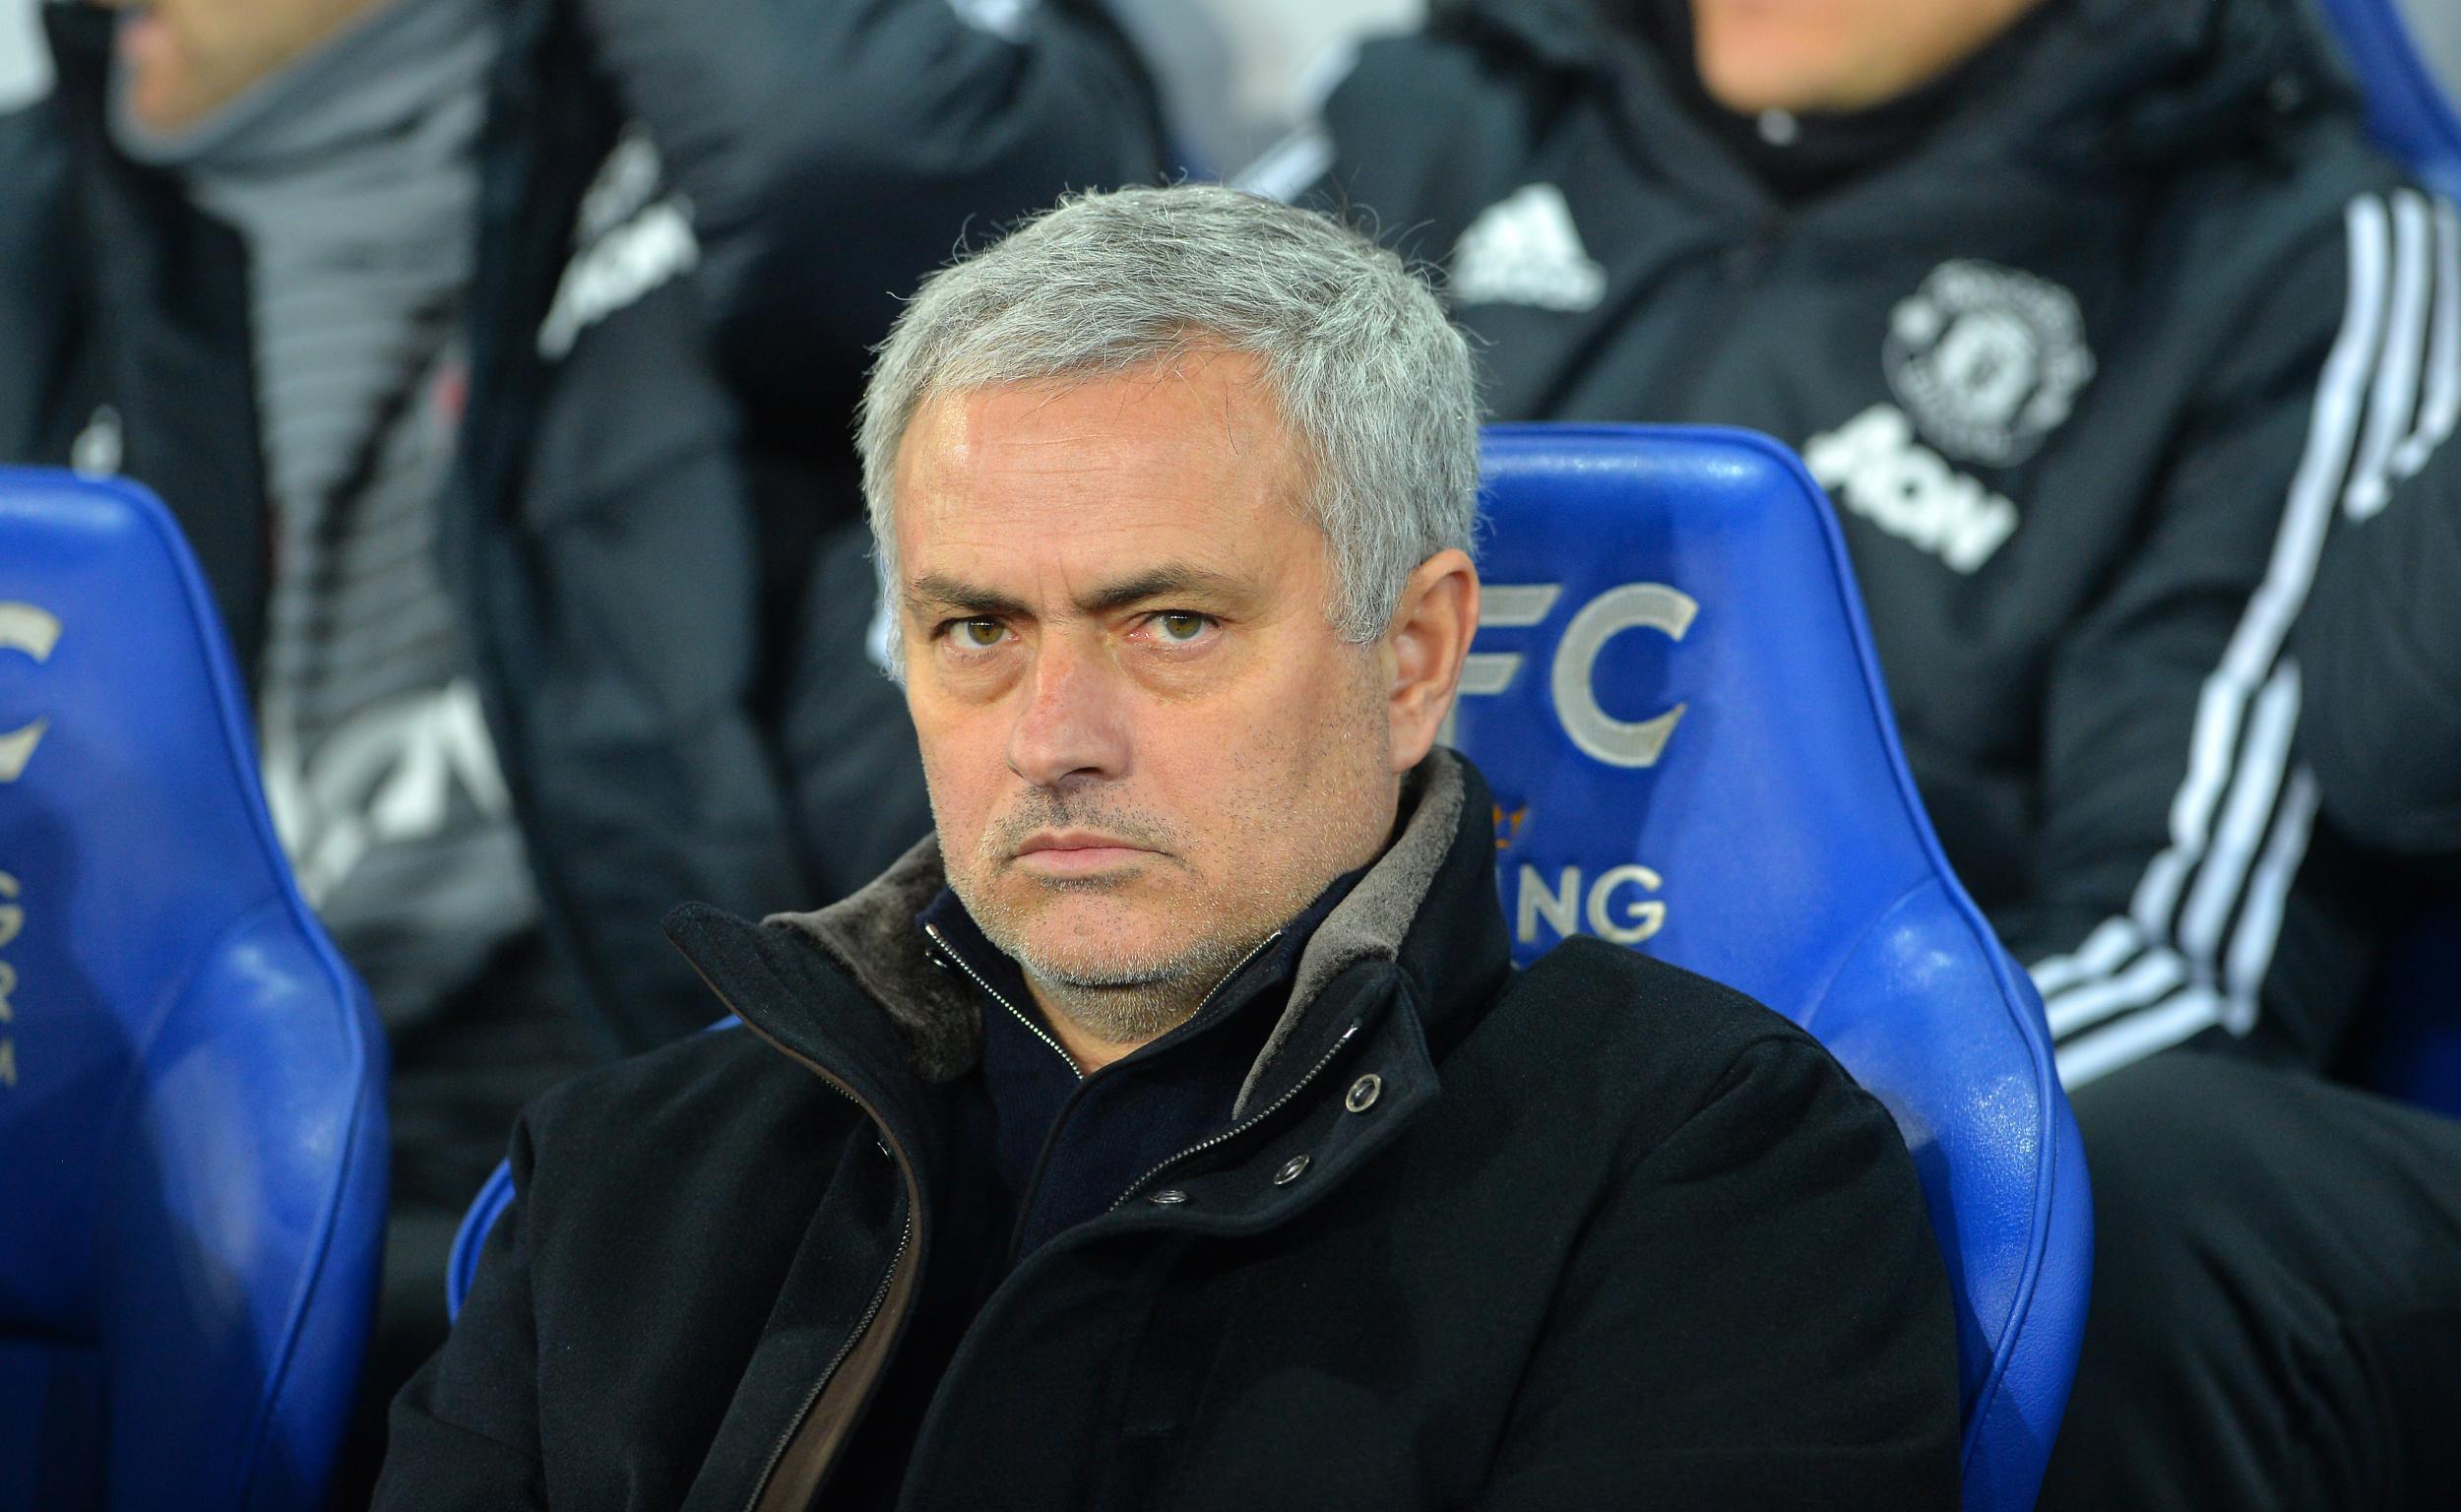 Jose Mourinho's men failed to hold on for victory